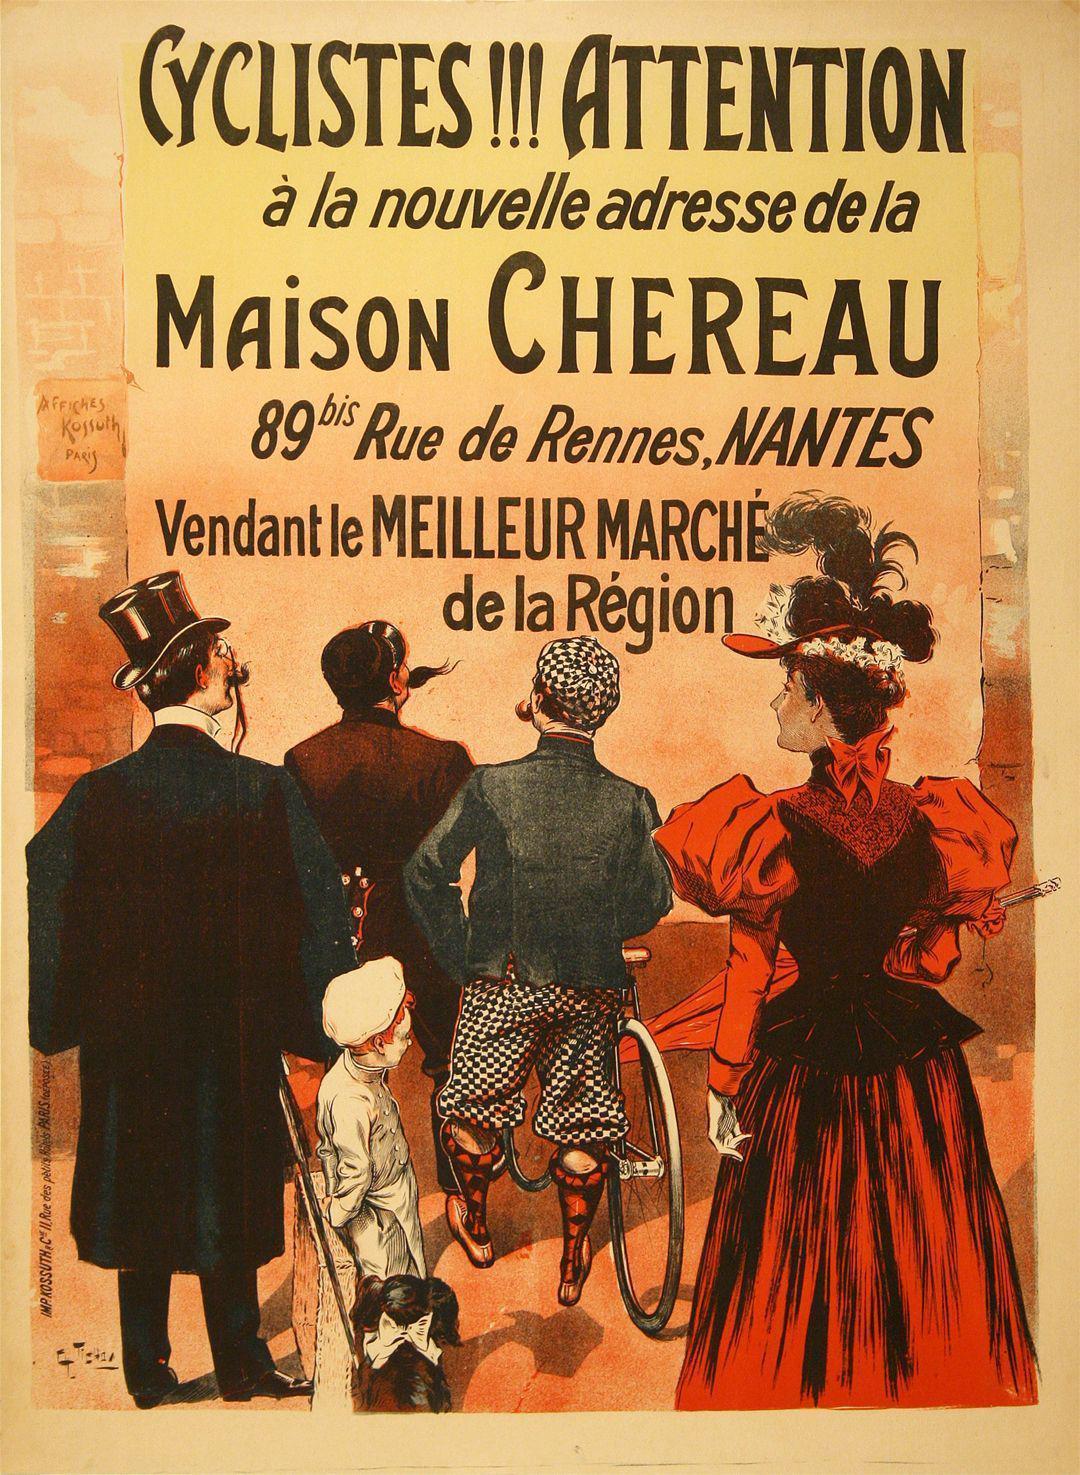 Original Vintage Cycling Poster Attention Cyclistes by Charles Tichon C1895